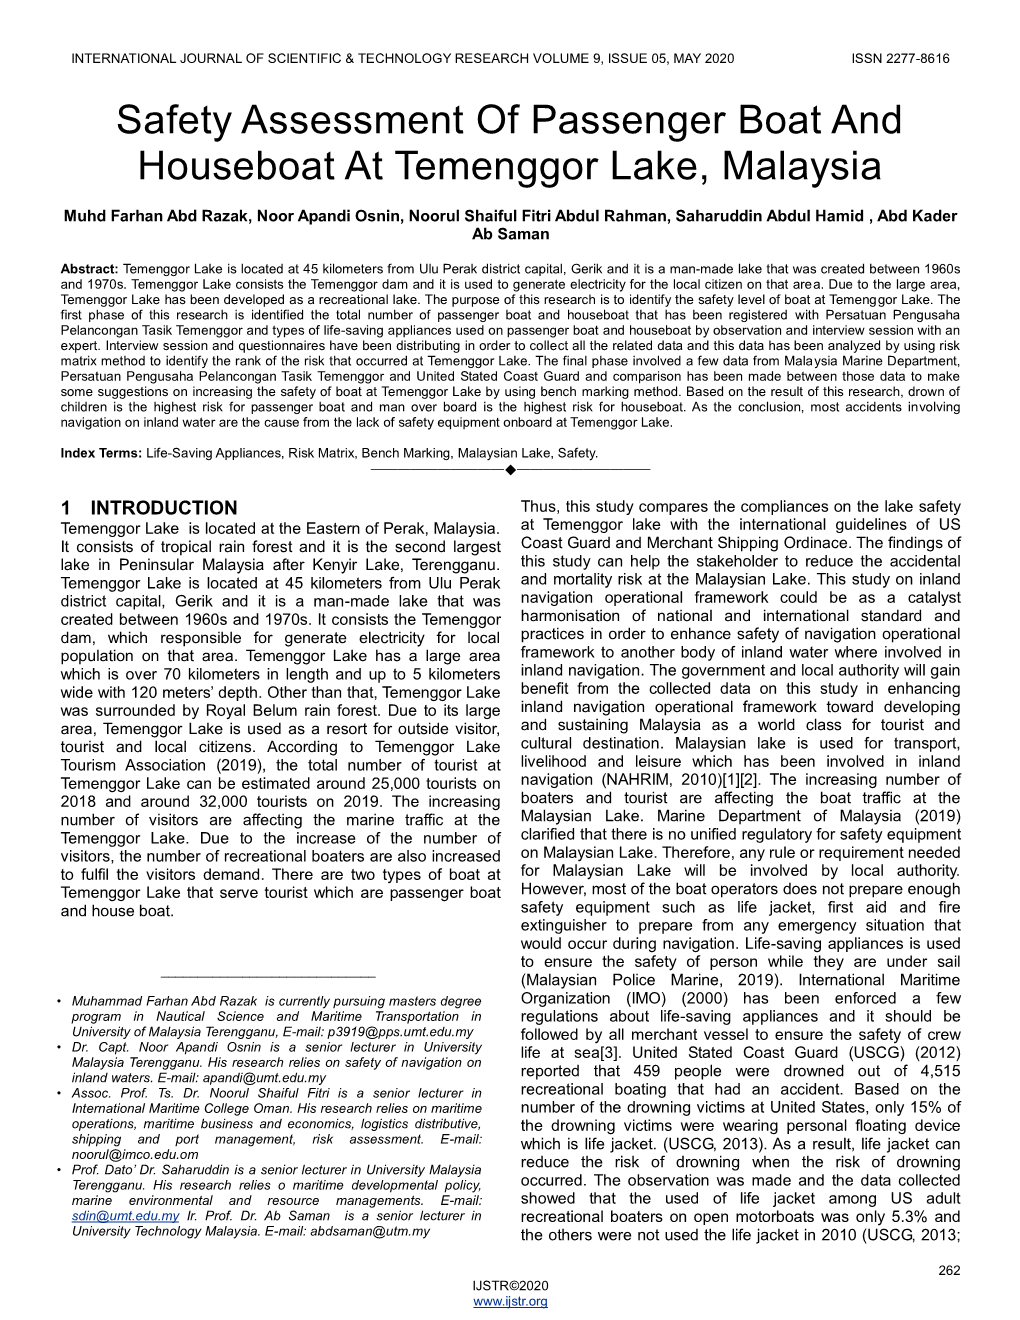 Safety Assessment of Passenger Boat and Houseboat at Temenggor Lake, Malaysia